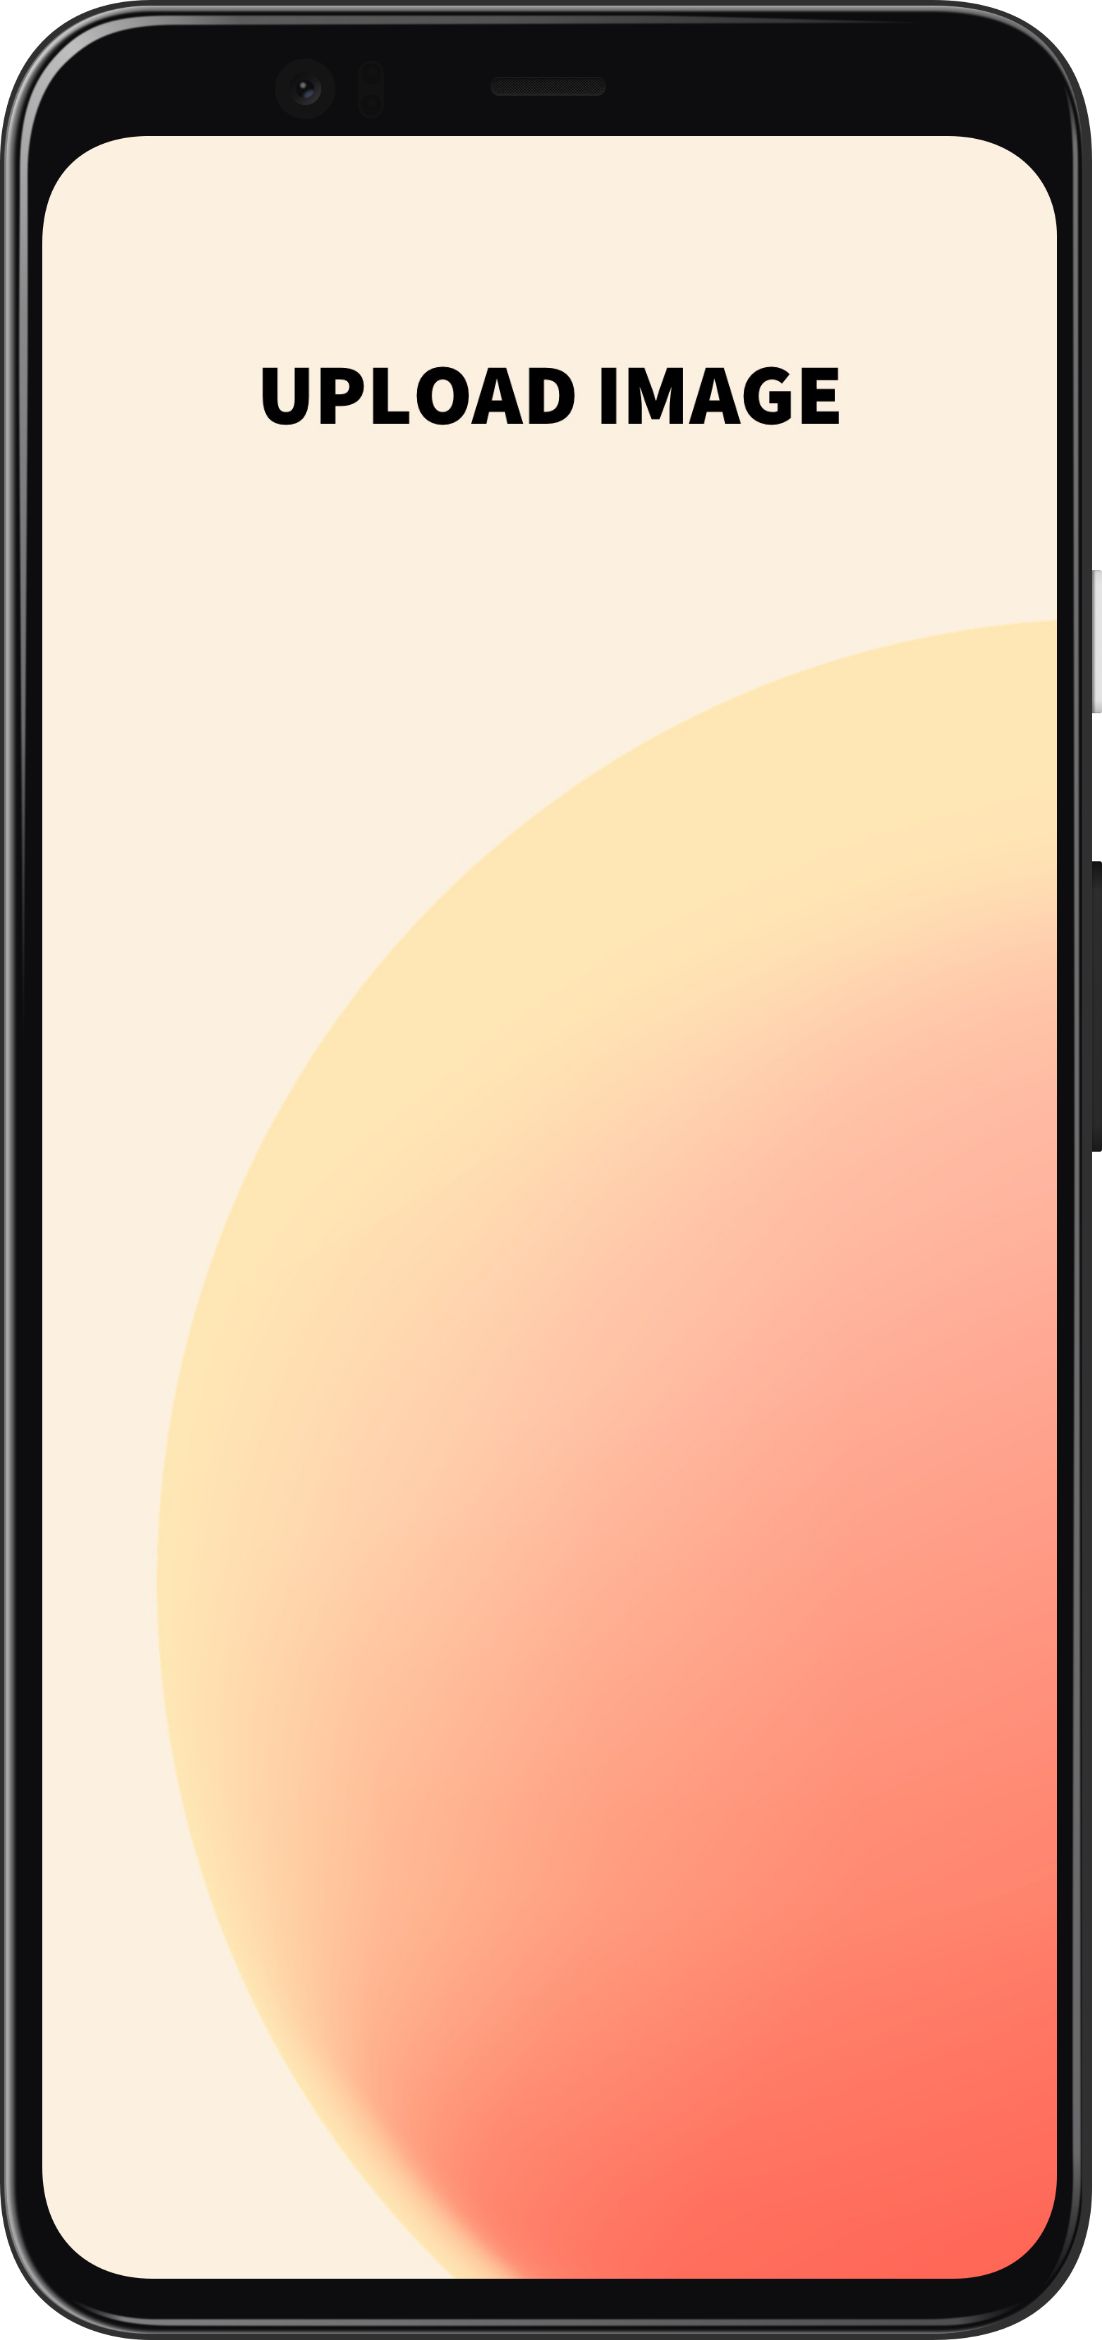 Google Pixel 4 XL Mockup 1 template. Quickly edit text, colors, images, and more for free.